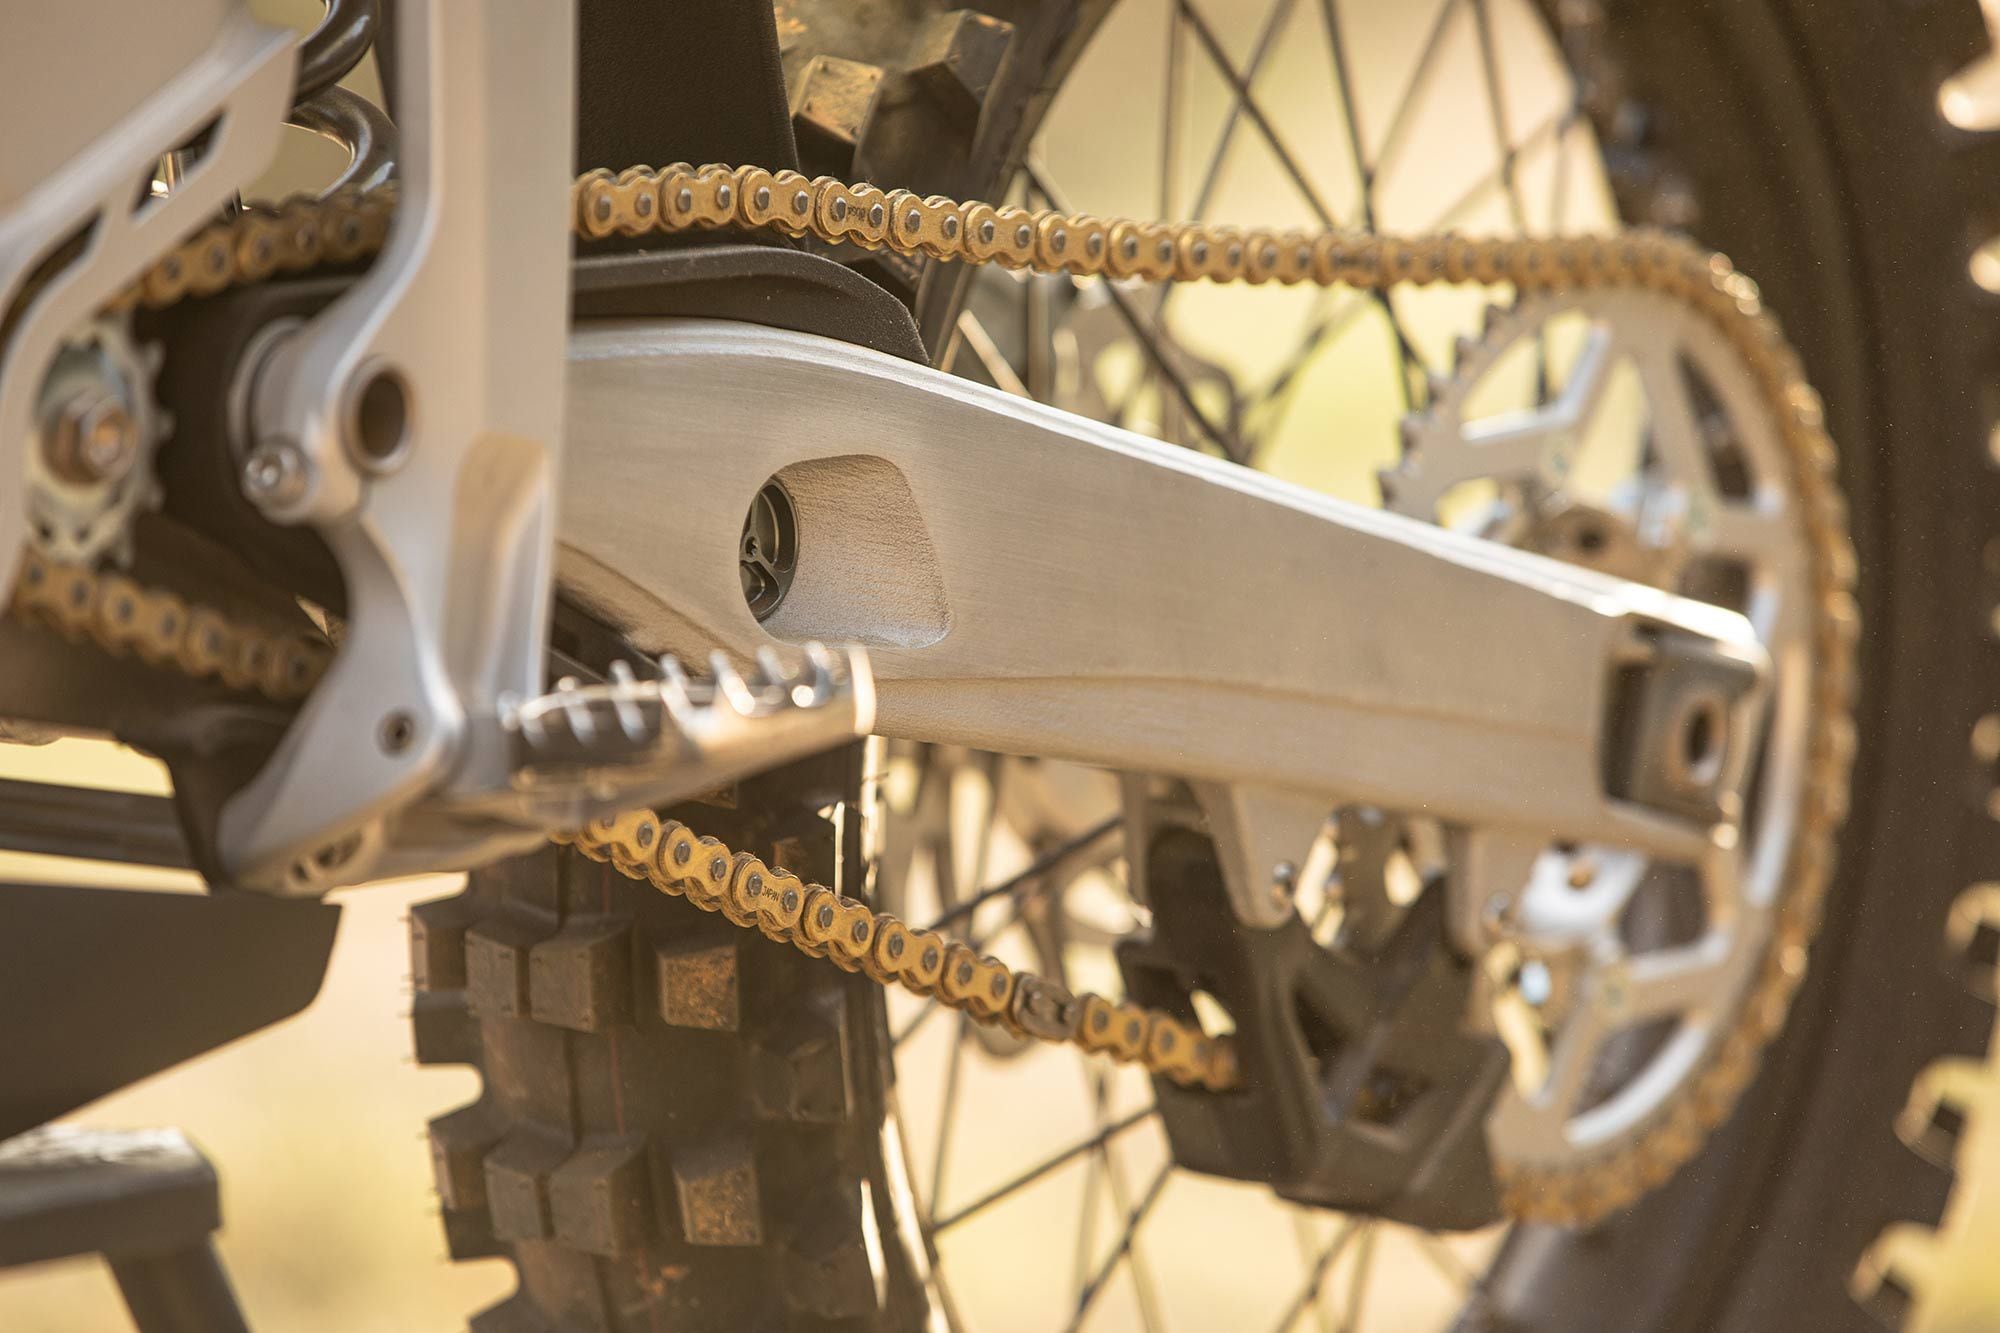 Captive adjustment axle slider block makes chain adjustment easier and more accurate.